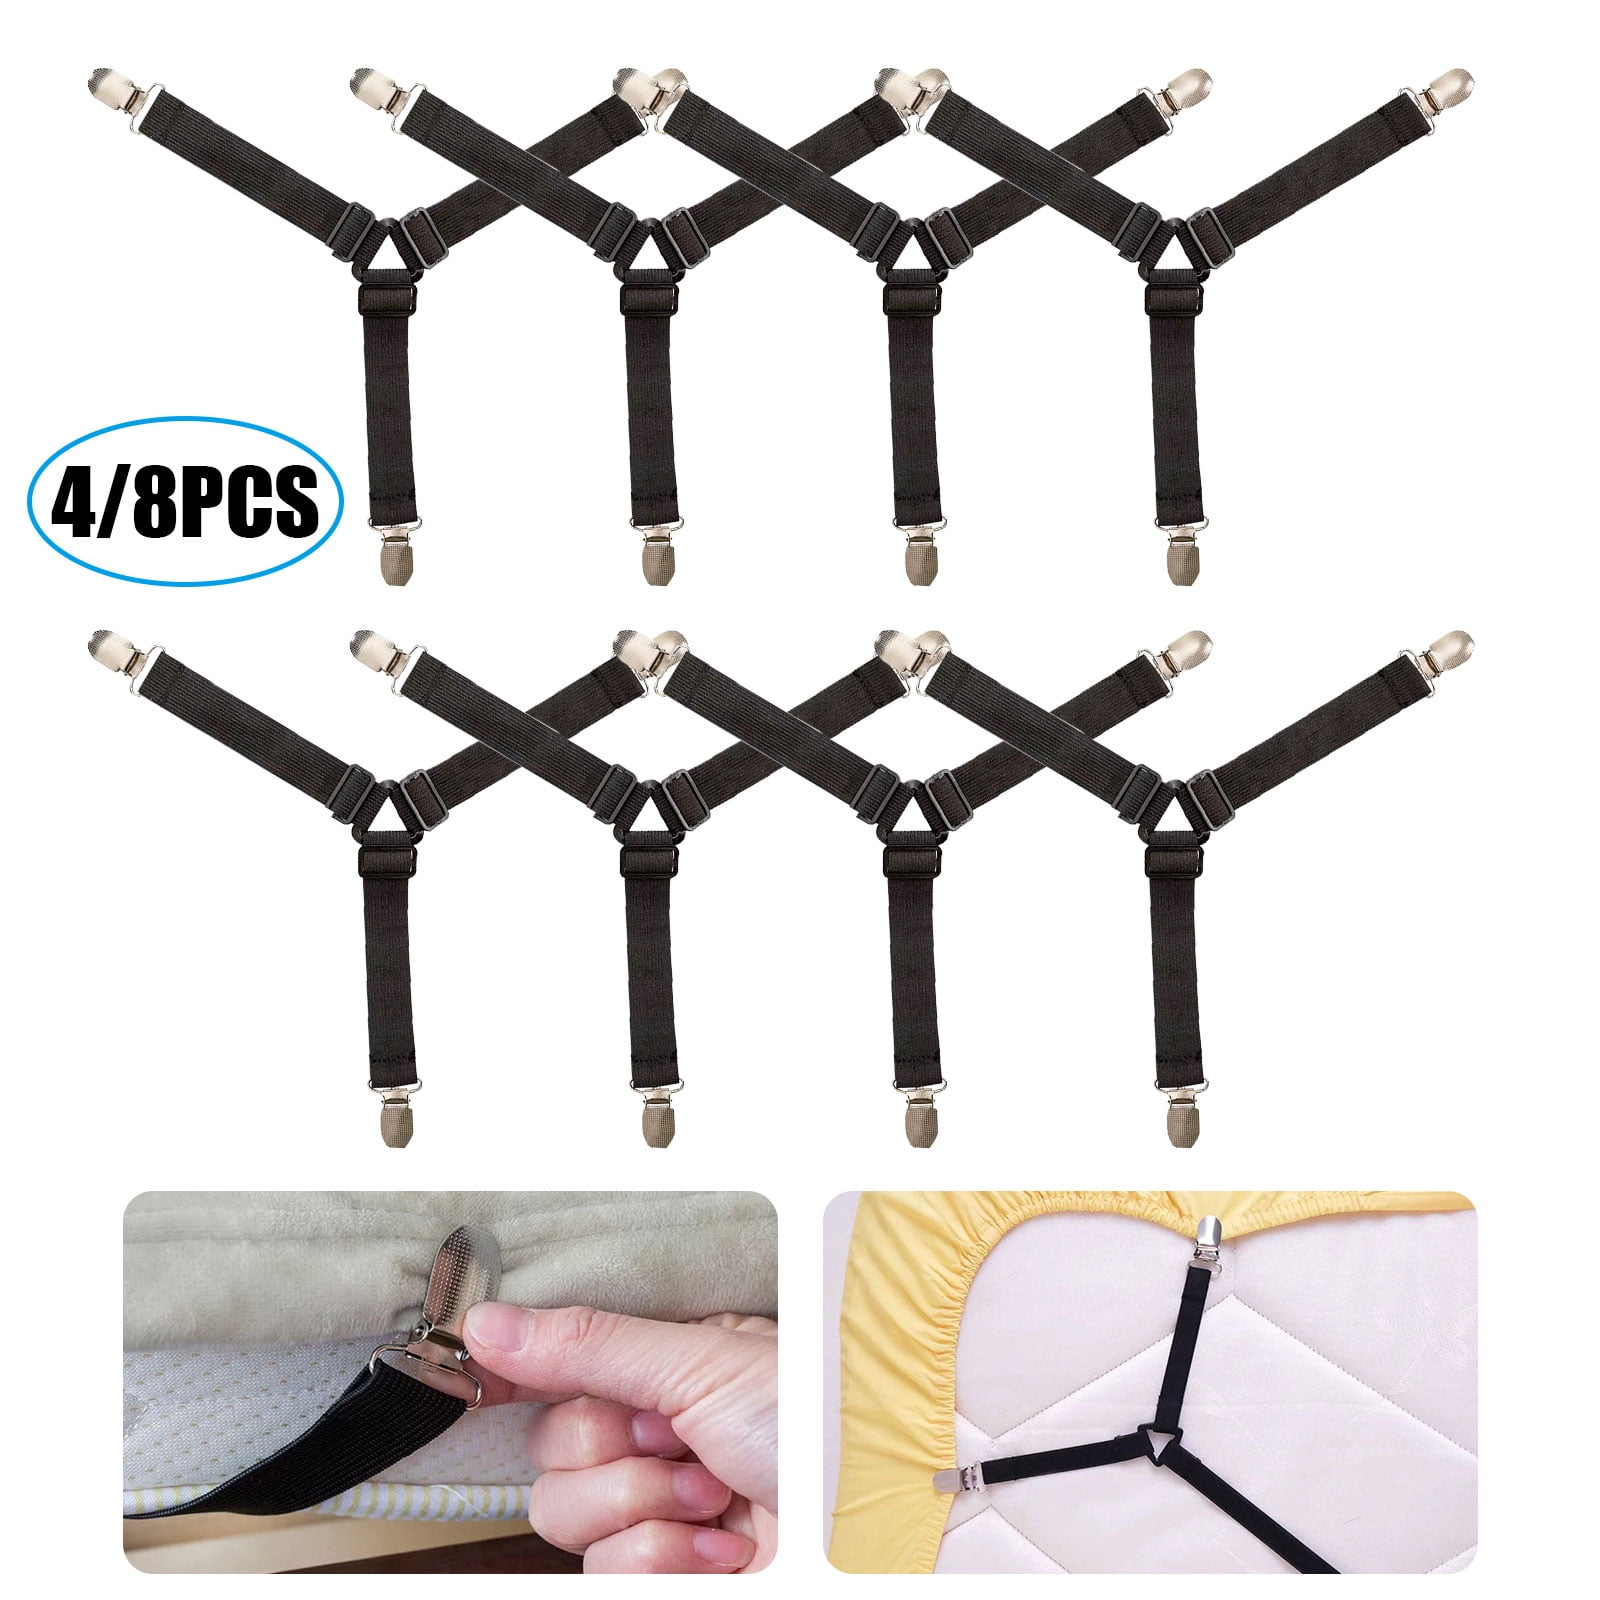 4 Triangle Bed Sheet Mattress Holder Fastener Grippers Clips Straps RLTS UK Sell 